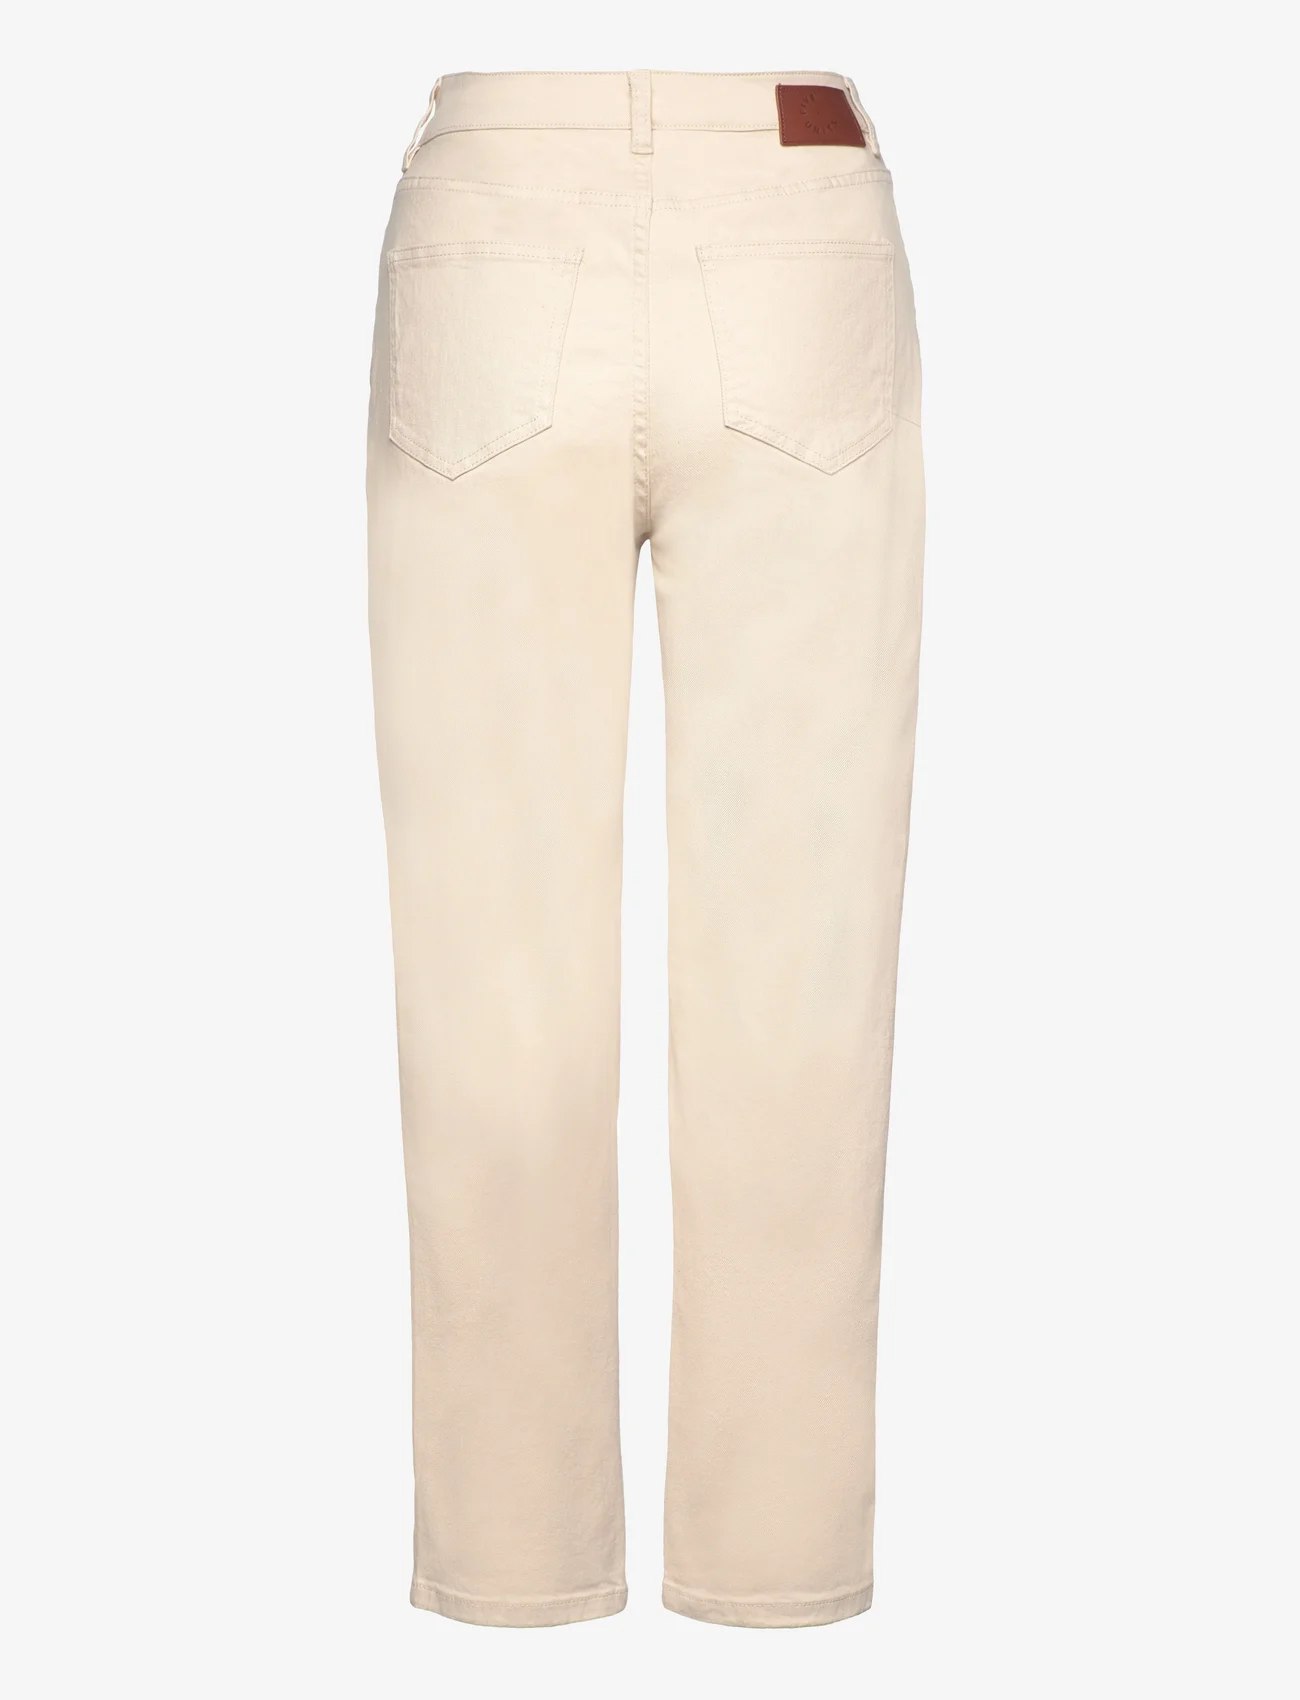 FIVEUNITS - MollyFV Ankle - straight jeans - natural - 1